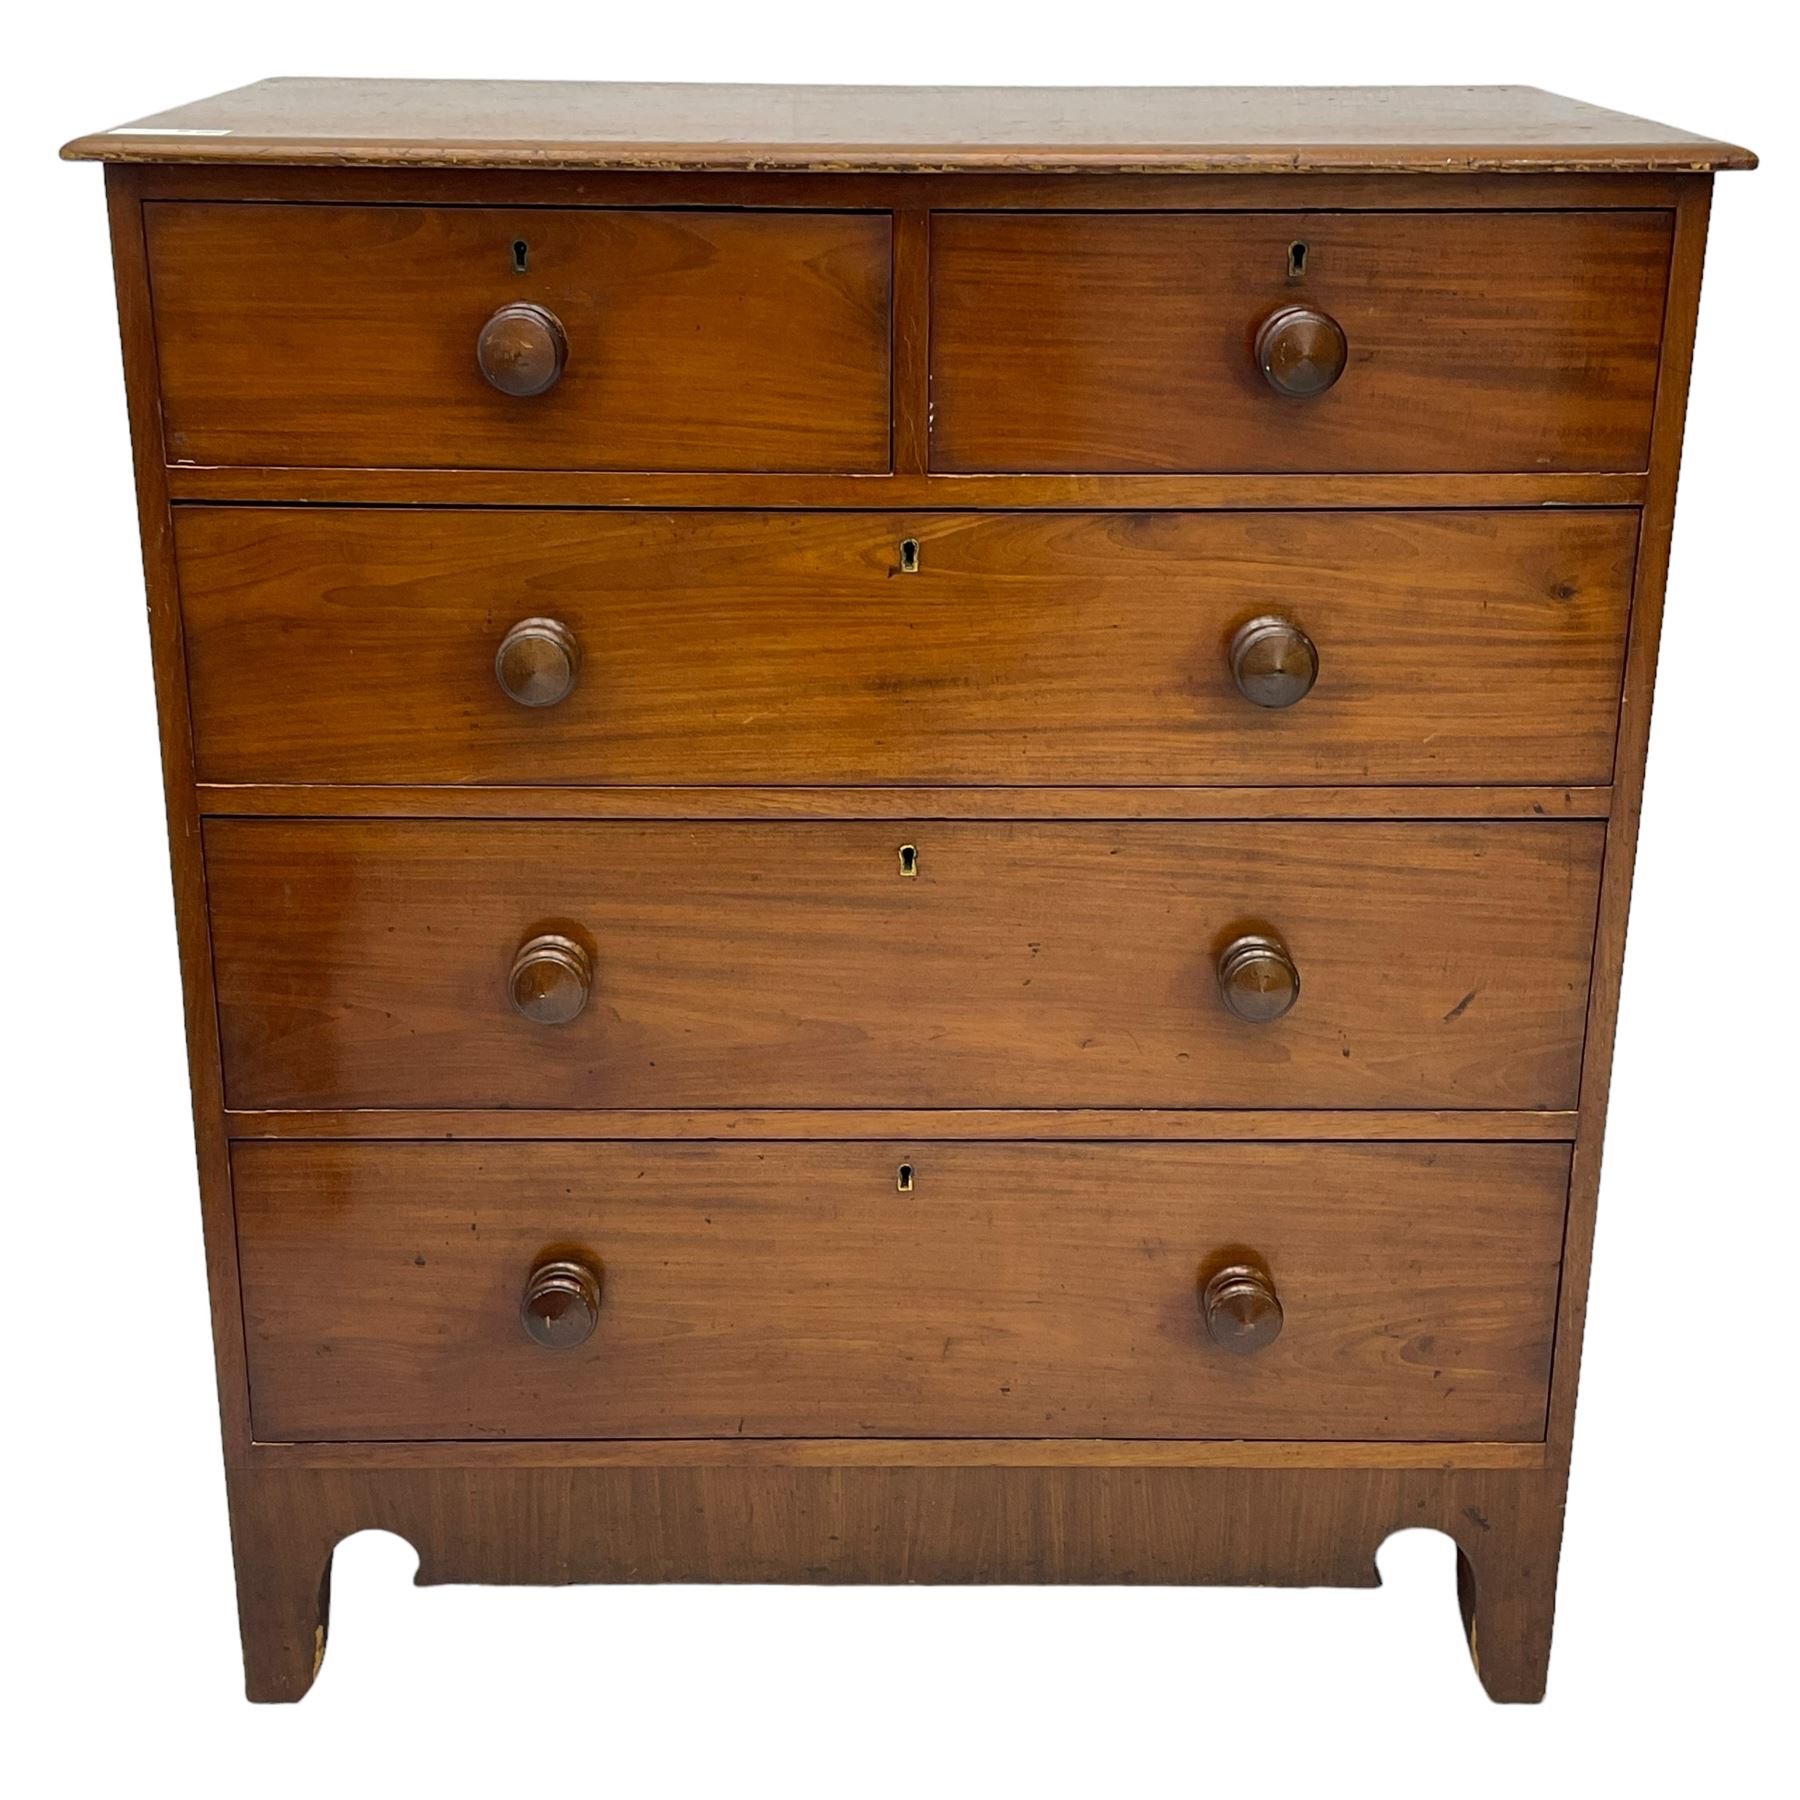 19th century mahogany and pine chest - Image 2 of 8